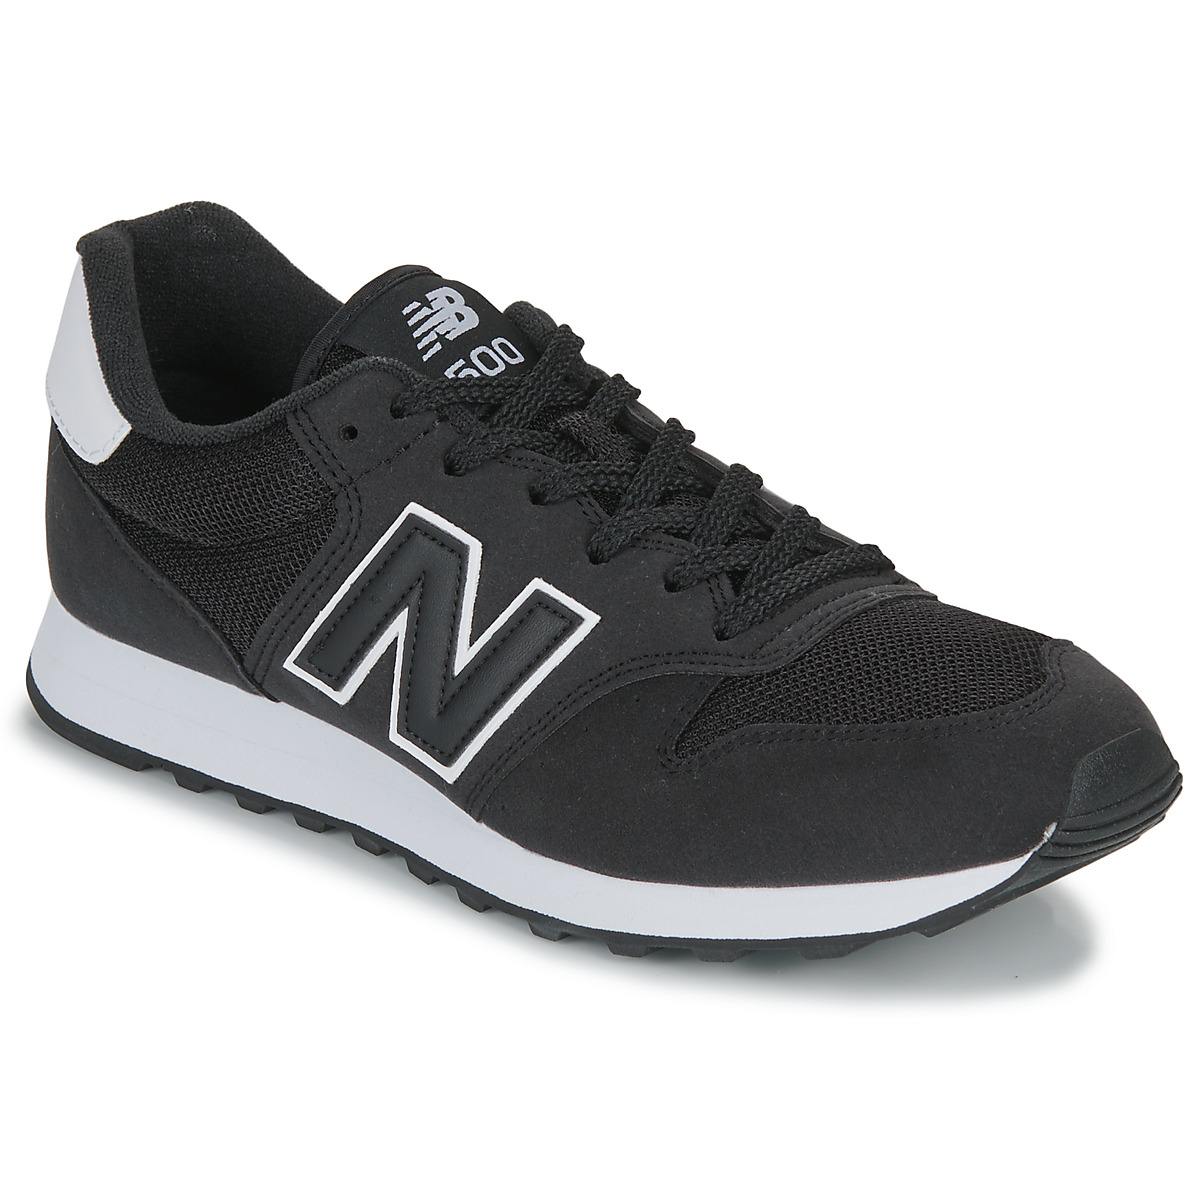 Chaussures ZAPATILLA NEUTRA MUJER OUTLET NEW BALANCE NEW BALANCE 890 V7 500 Noir